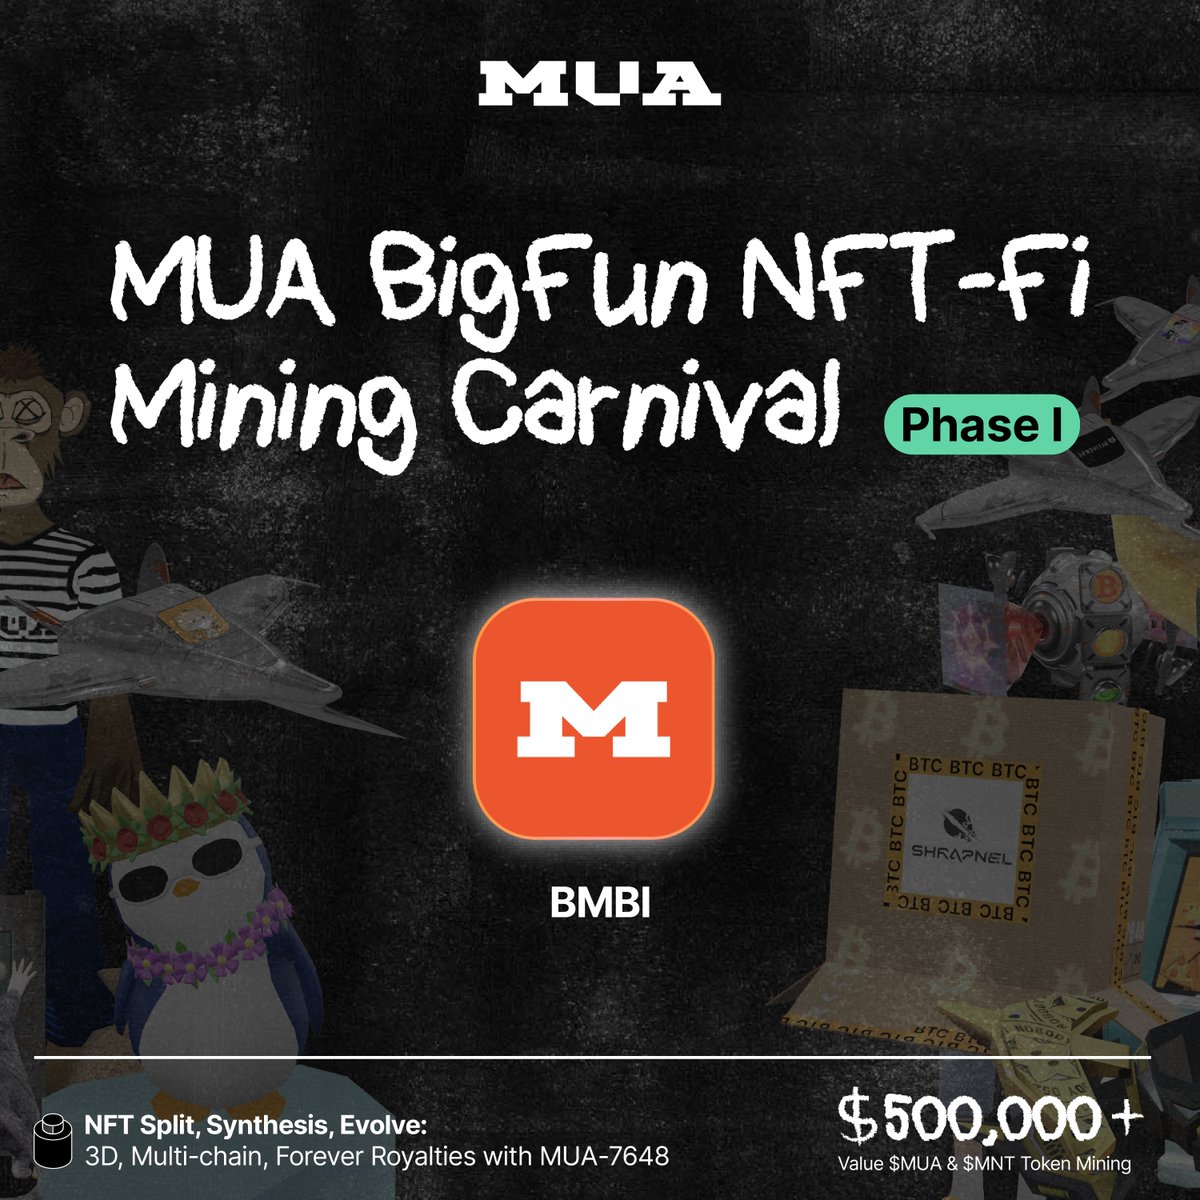 🌟 All #BMBI holders! 🚀 Tap into the 3x weight power in BigFun NFT-Fi Mining and watch your rewards blast off! 💸 Grab a share of the 500,000+U $MUA & $MNT token airdrop! 🔮 Witness the enchanting #MUA7648magic